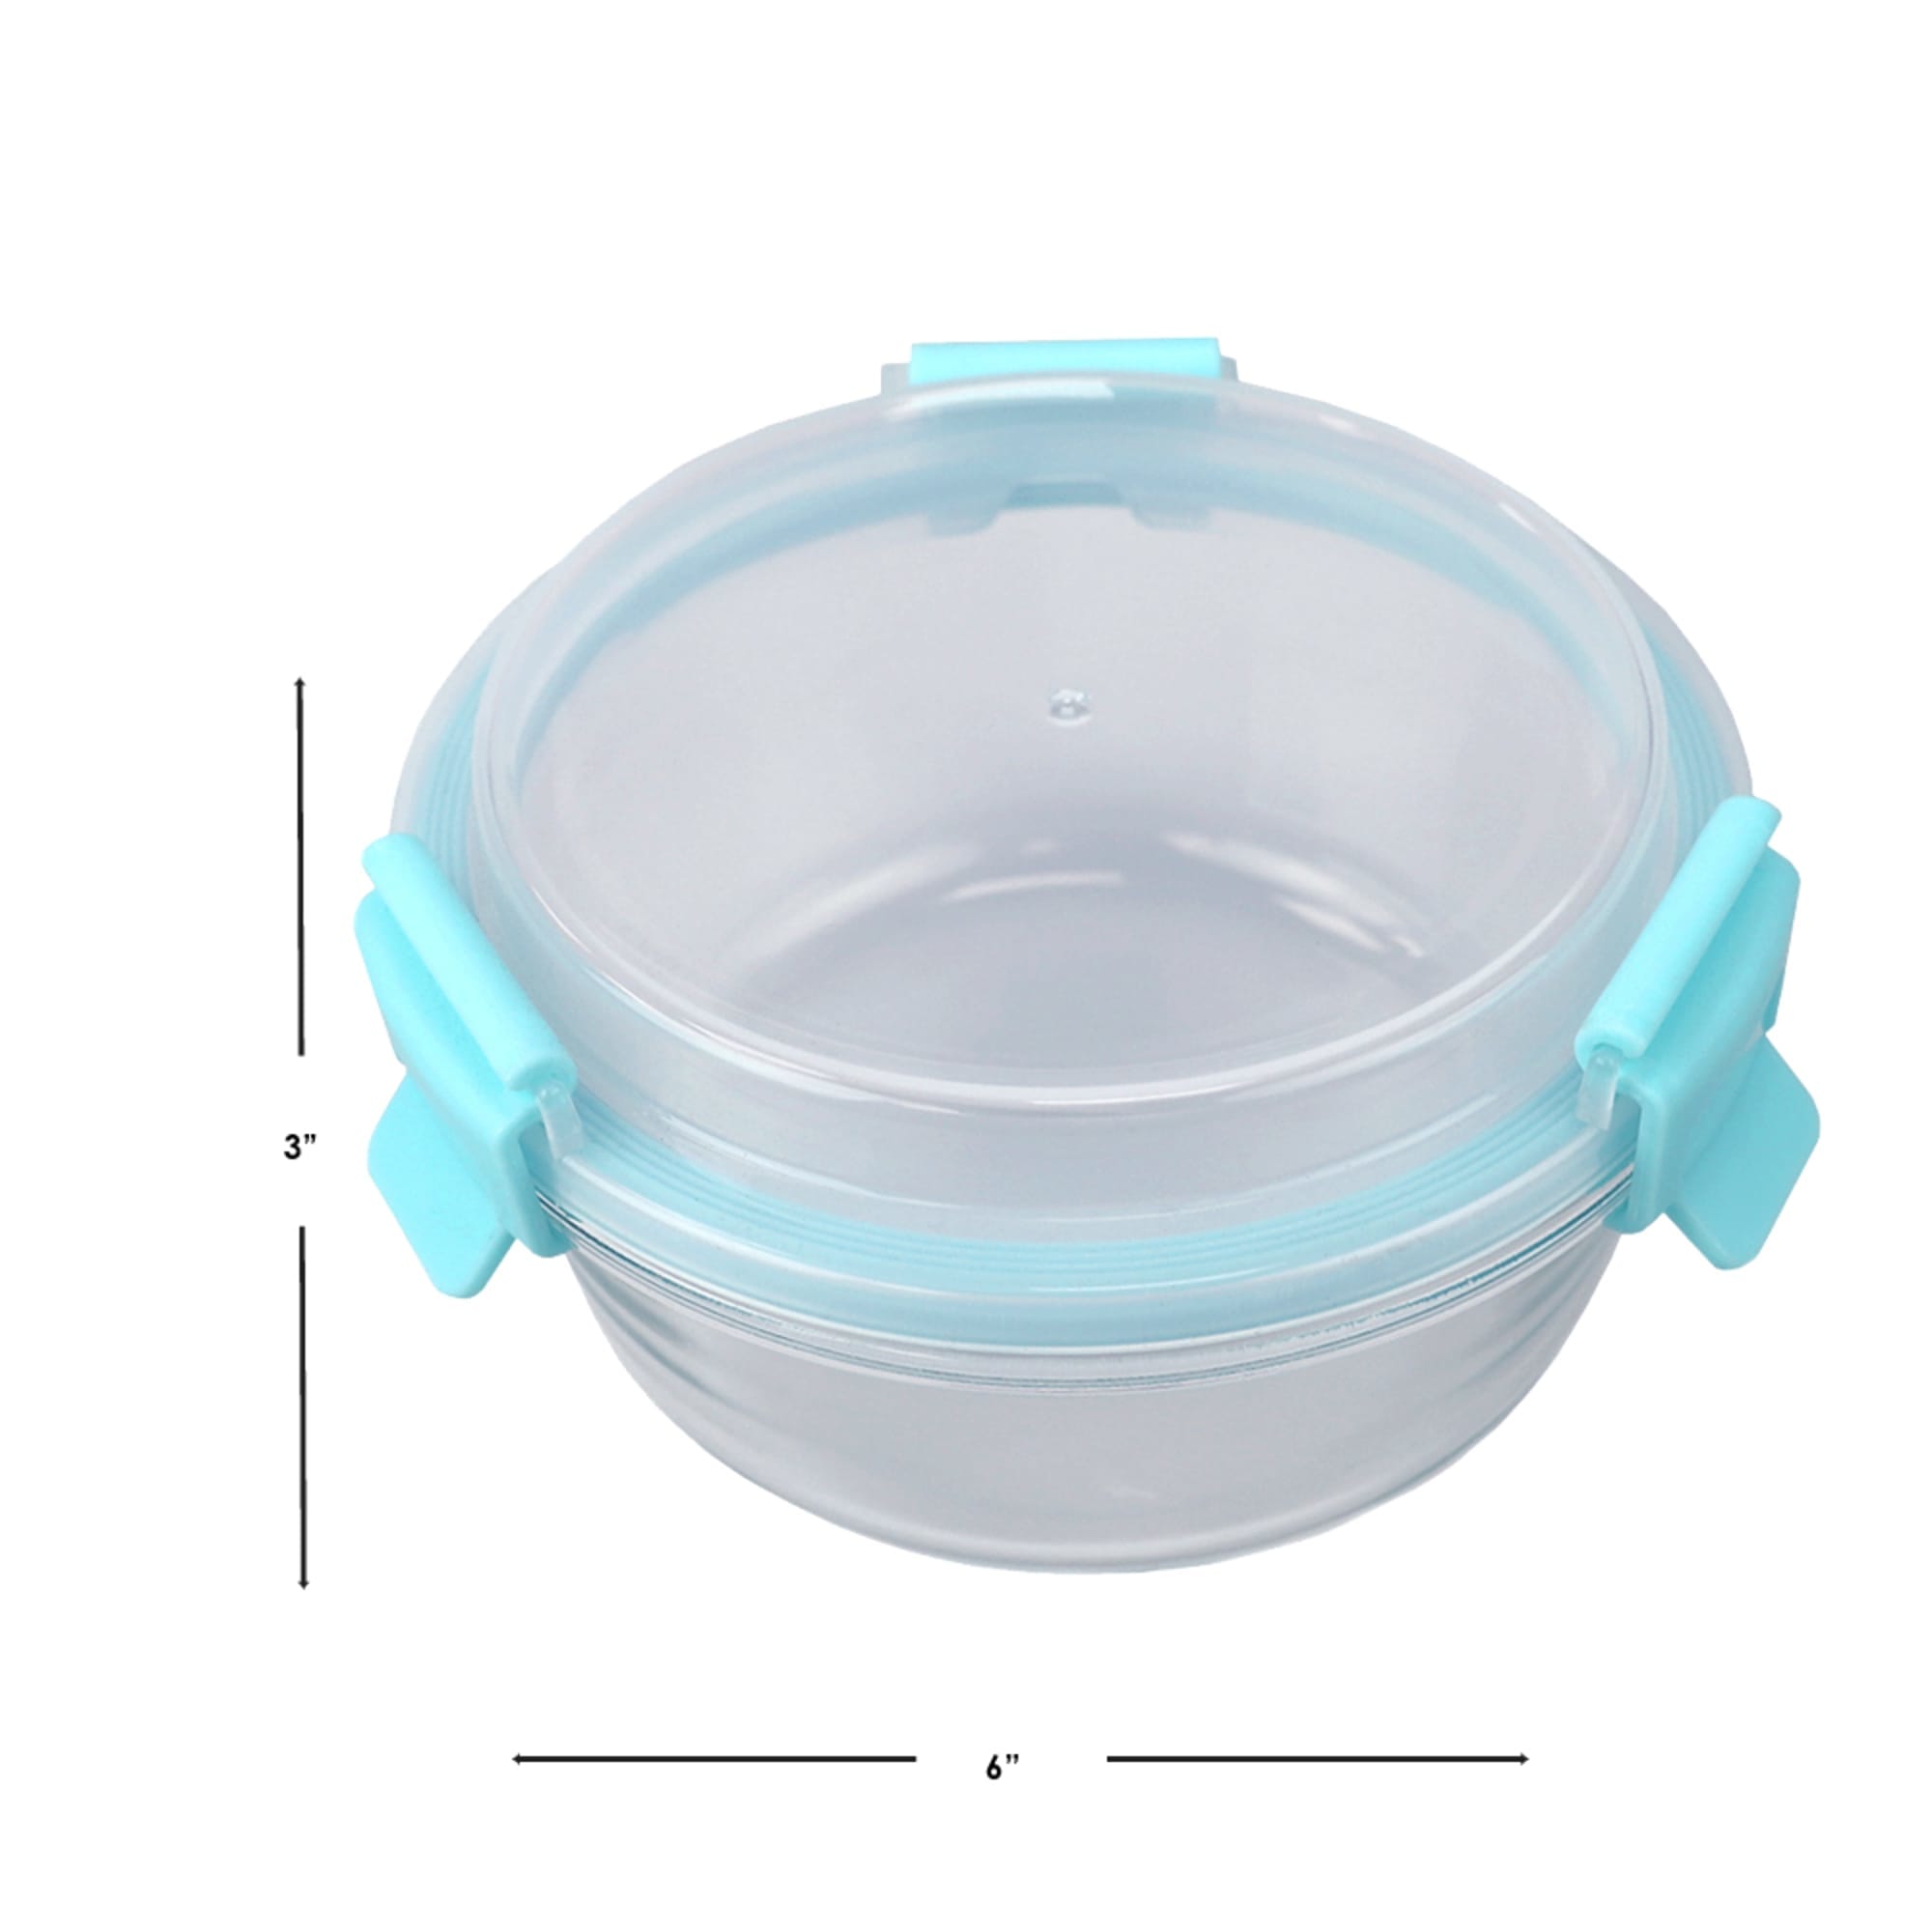 Home Basics 21 oz.  Round Leak and Spill Proof  Borosilicate Glass  Food Storage Dishwasher Safe Meal Prep Storage Container with Air-tight Plastic Lid, Turquoise $4 EACH, CASE PACK OF 12